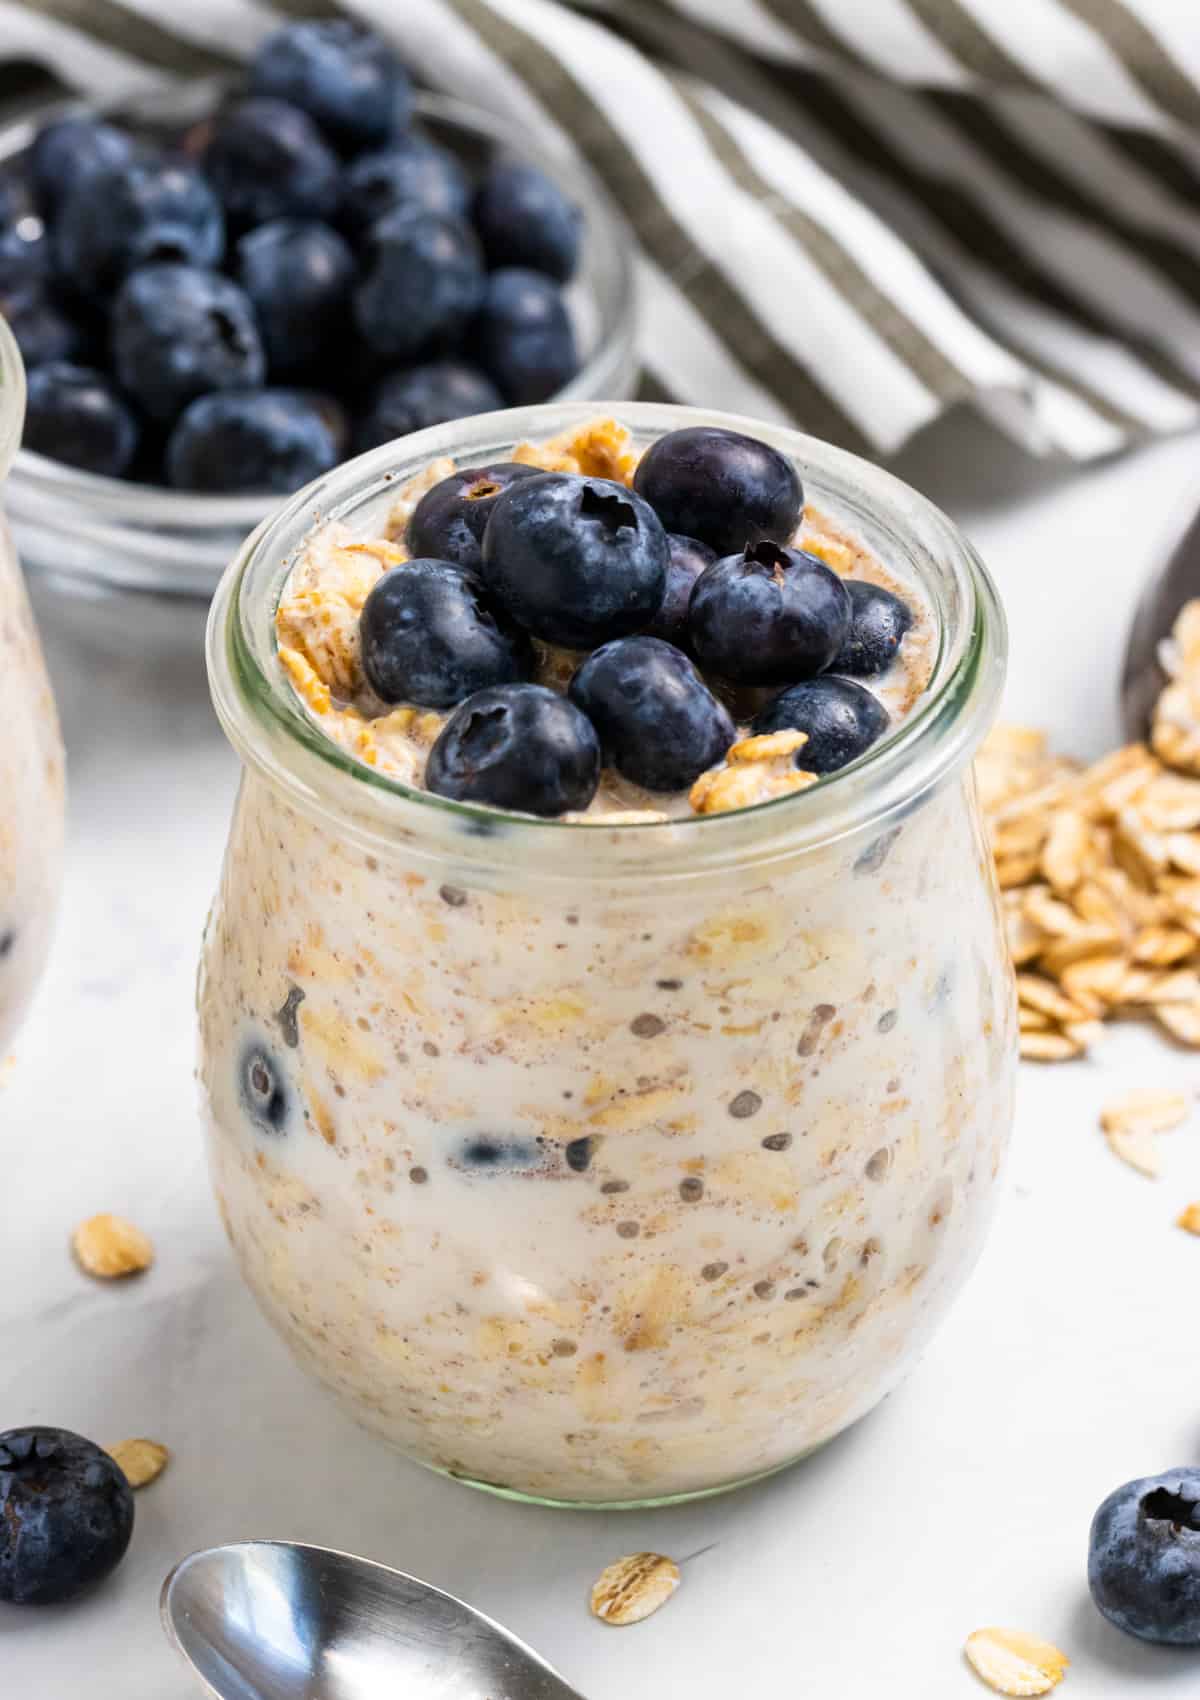 Oatmeal in jar with blueberries on top.